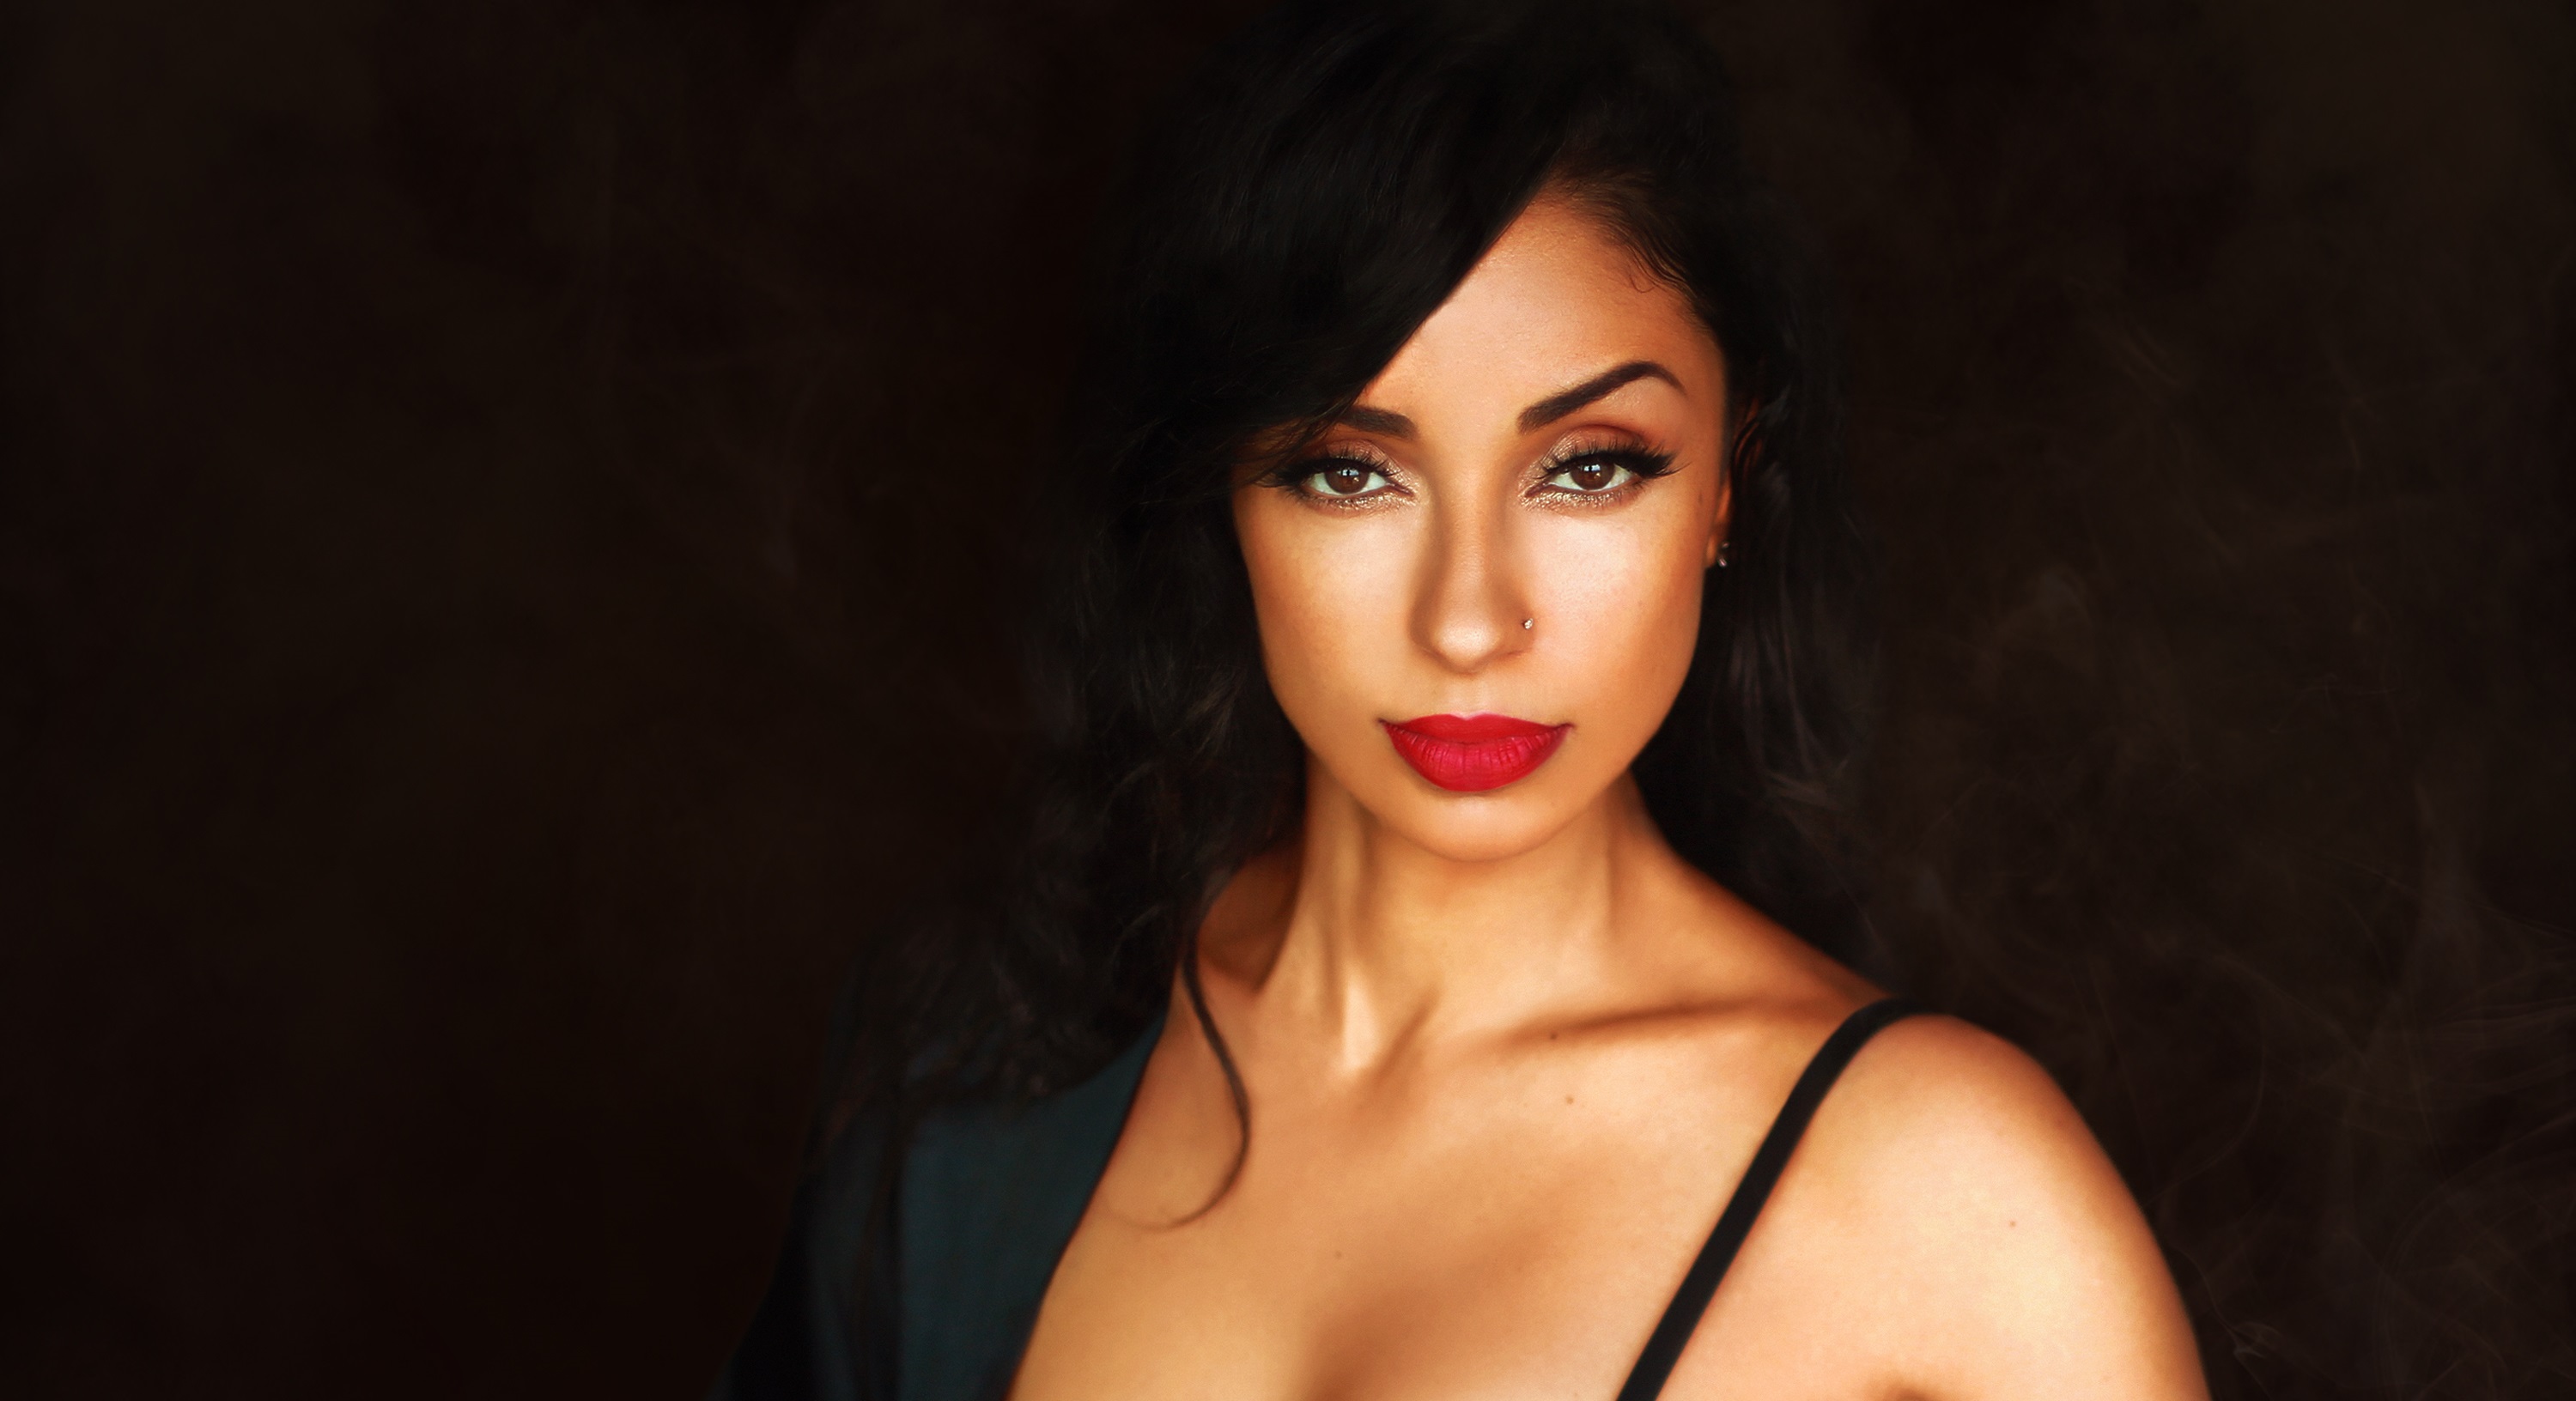 She’s Back! Listen To Mya’s New Song – ‘You Got Me (Part II)’